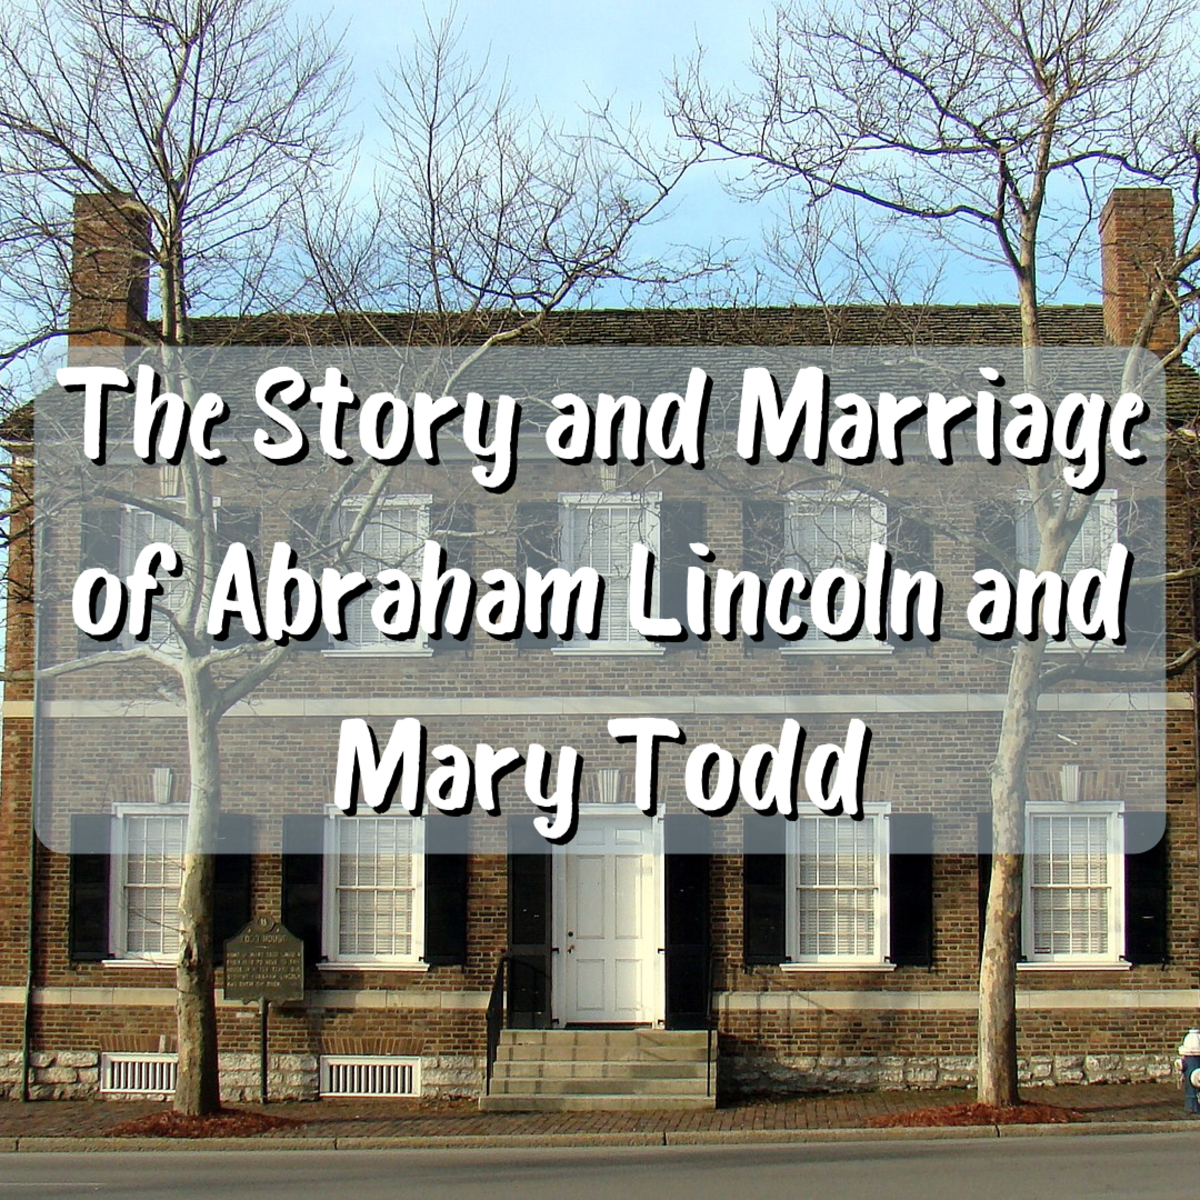 Read on to learn about the incredible story of Abraham Lincoln and Mary Todd, his wife. They shared an intriguing story of commitment and love over many years. Pictured above is the childhood home of Mary Todd Lincoln in Lexington, Kentucky.